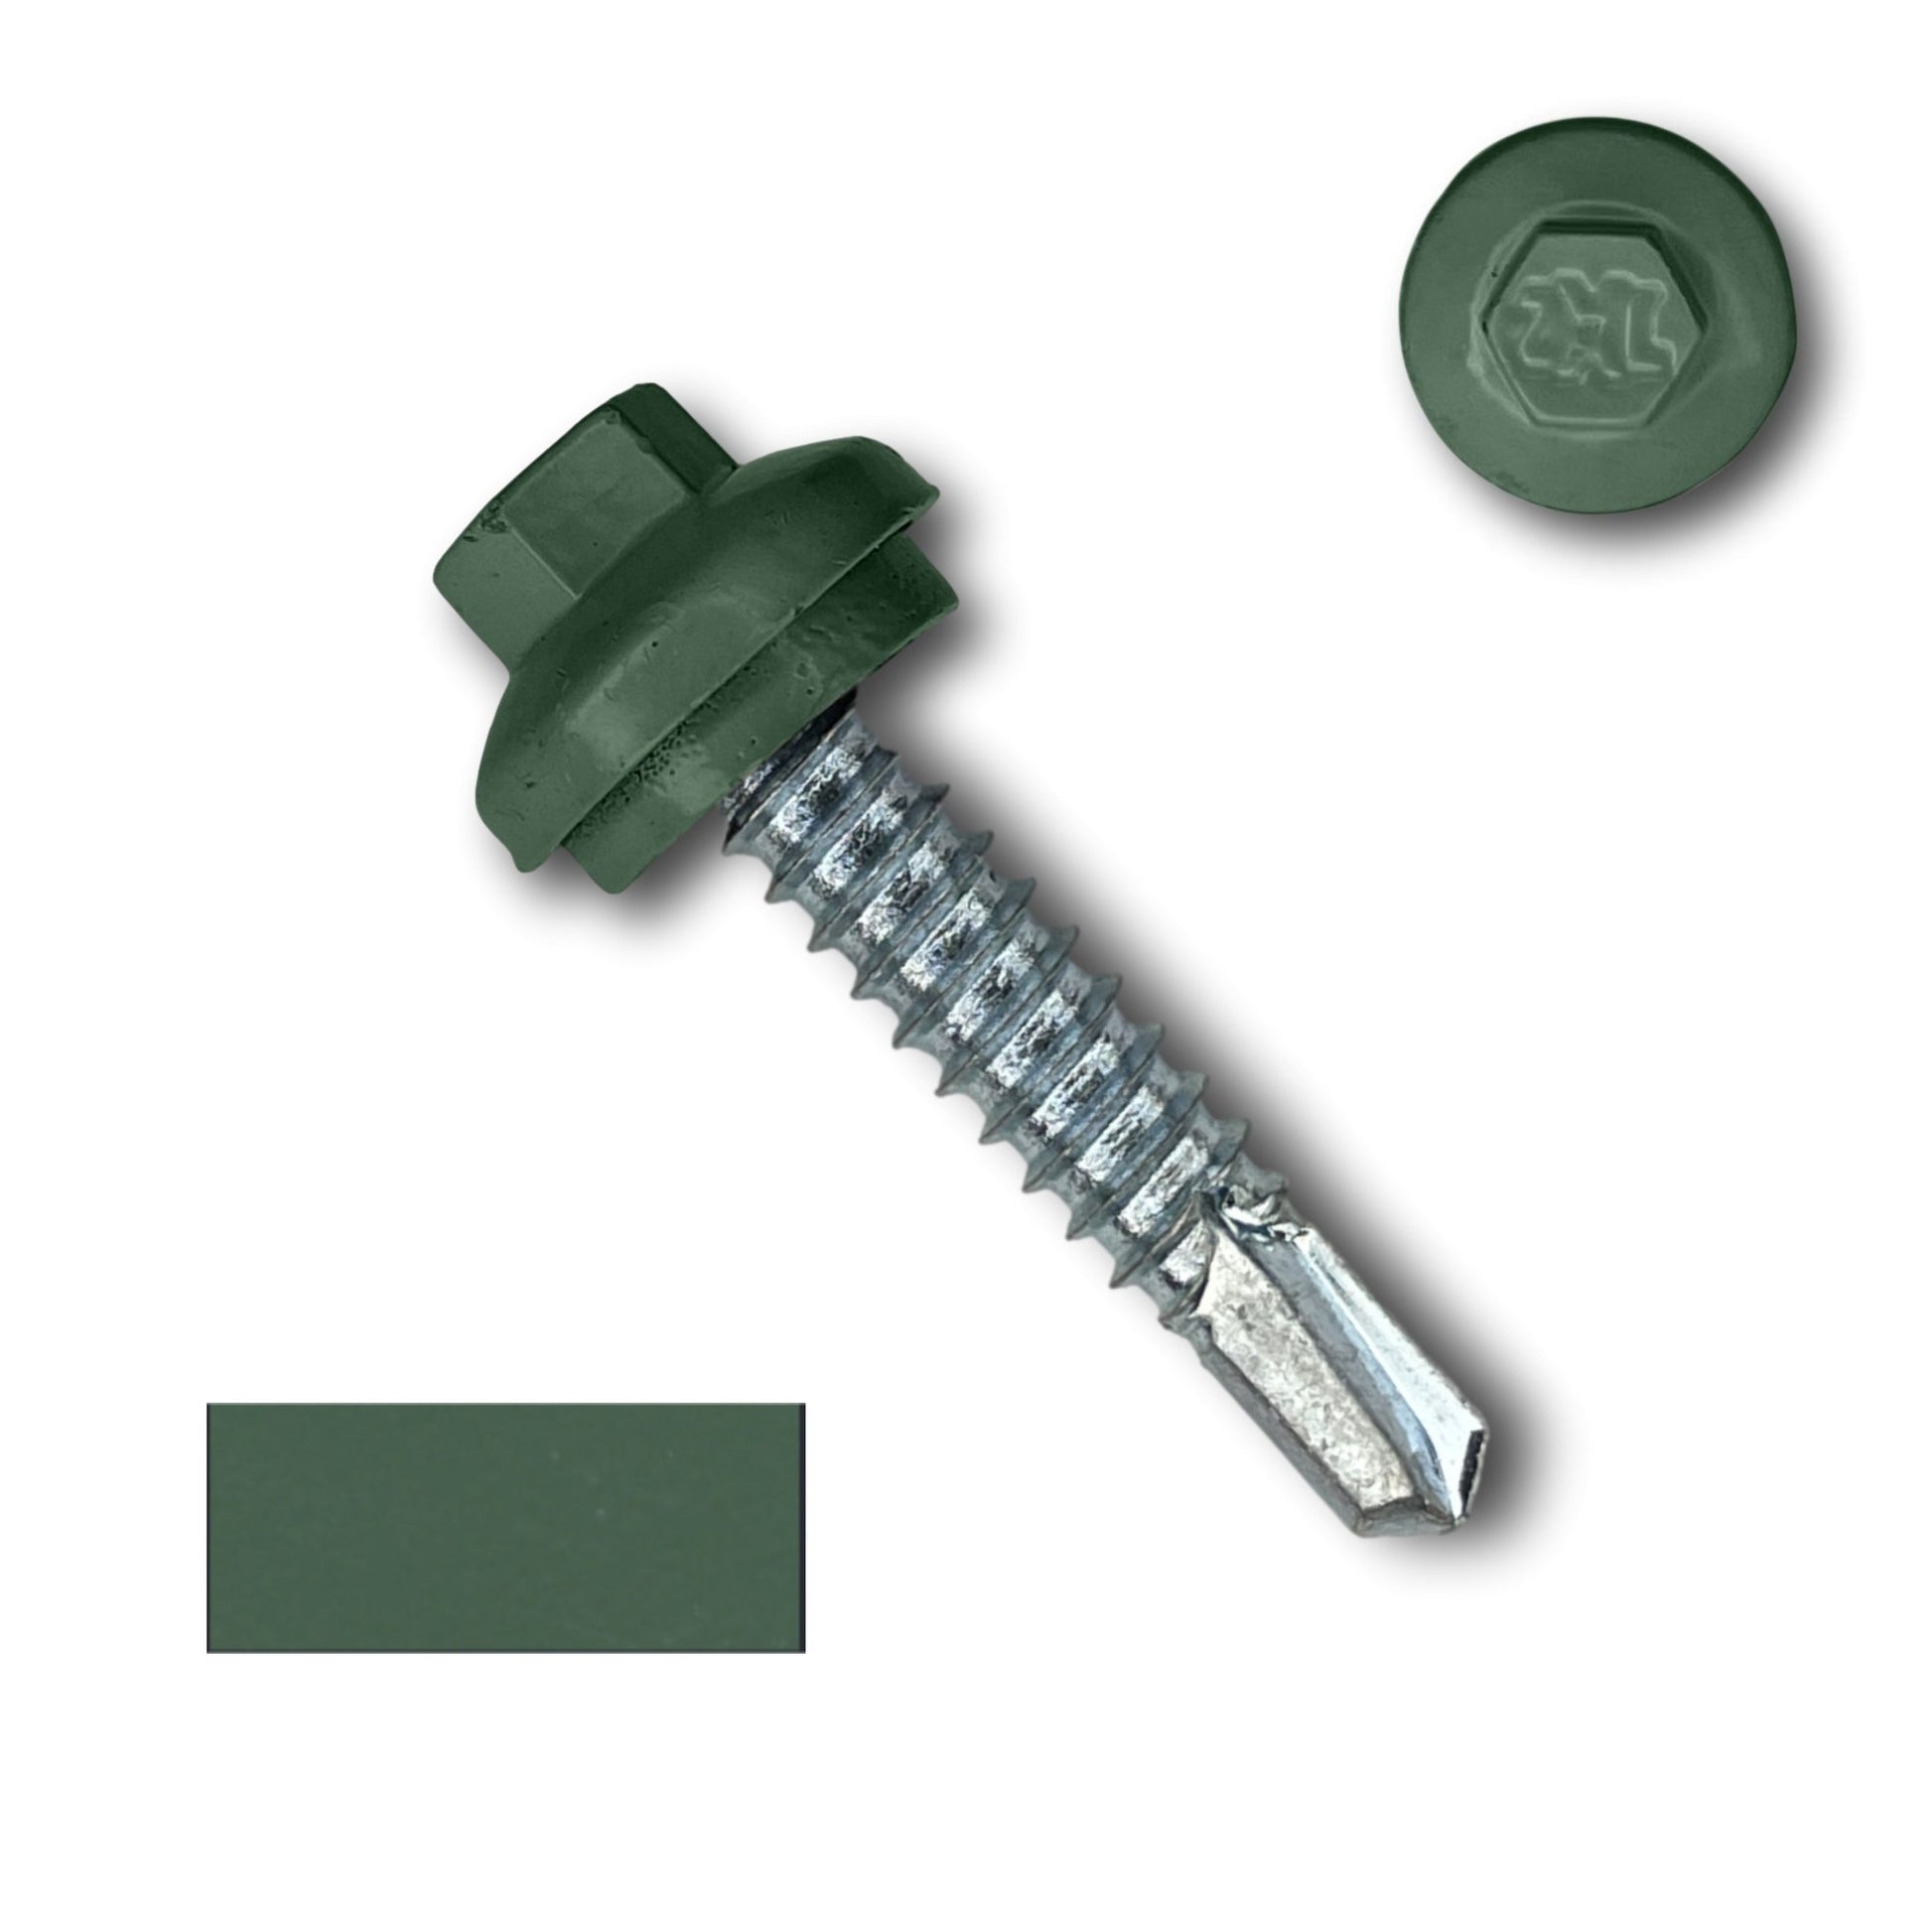 A Perma Cover #14 x 1.25" ZXL Dome Cap Metal Building Screws (Metal-to-Metal), Self-Drilling - 250, 500, or 1000 Pack with a neoprene sealing washer. The self-drilling screw features a drill point tip and a threaded body. The image includes a close-up of the hex head and a color swatch of the green.